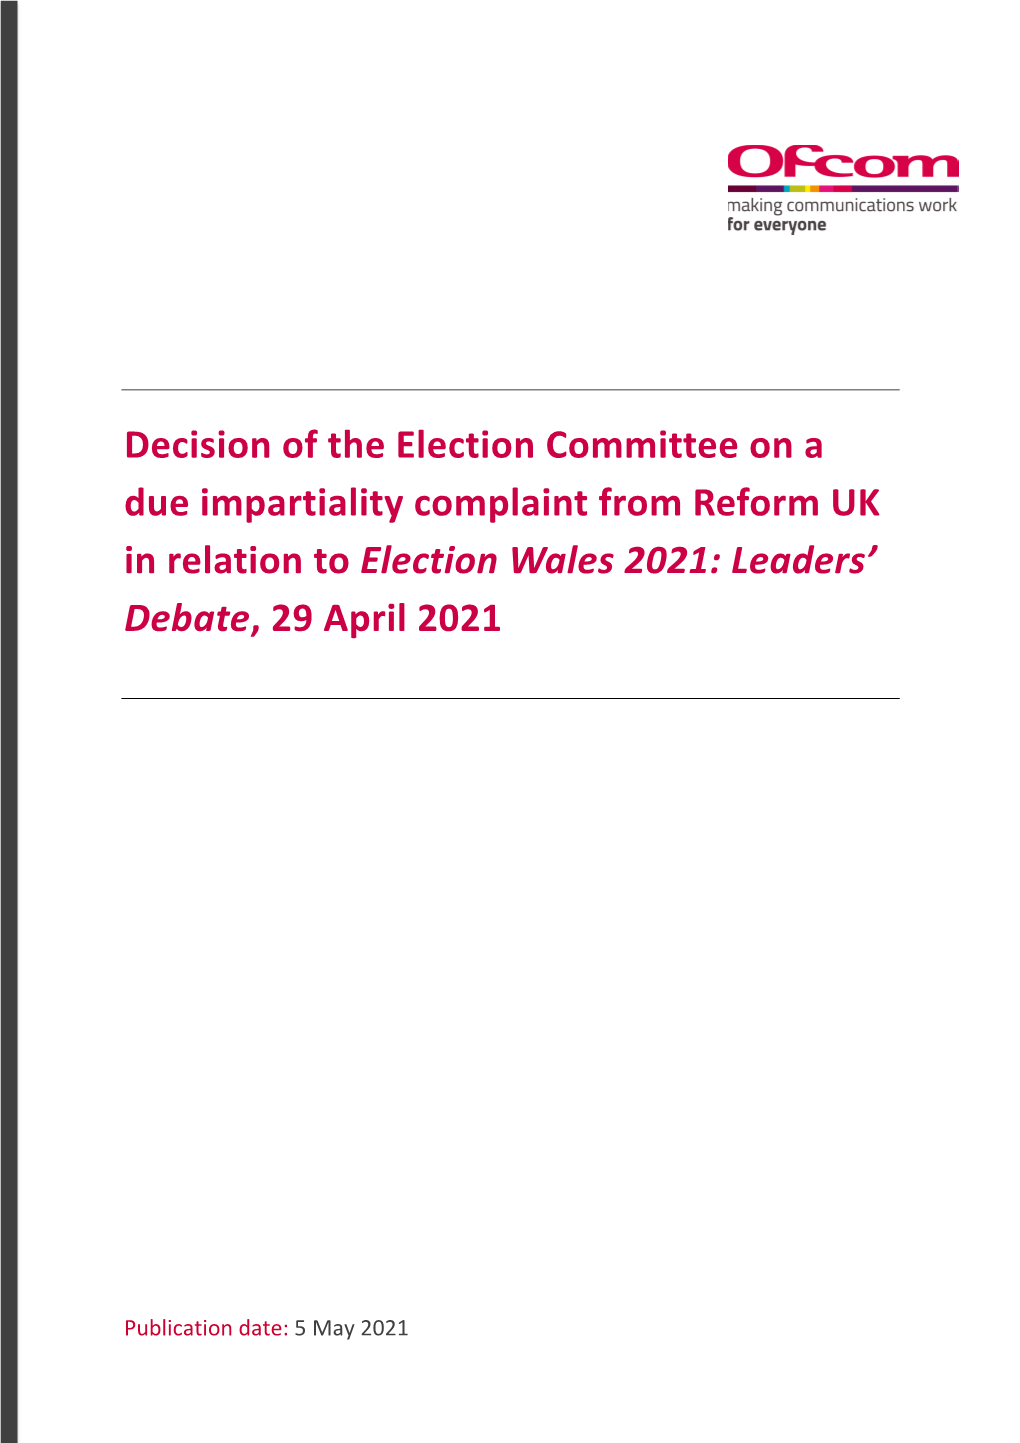 Decision of the Election Committee on a Due Impartiality Complaint from Reform UK in Relation to Election Wales 2021: Leaders’ Debate, 29 April 2021